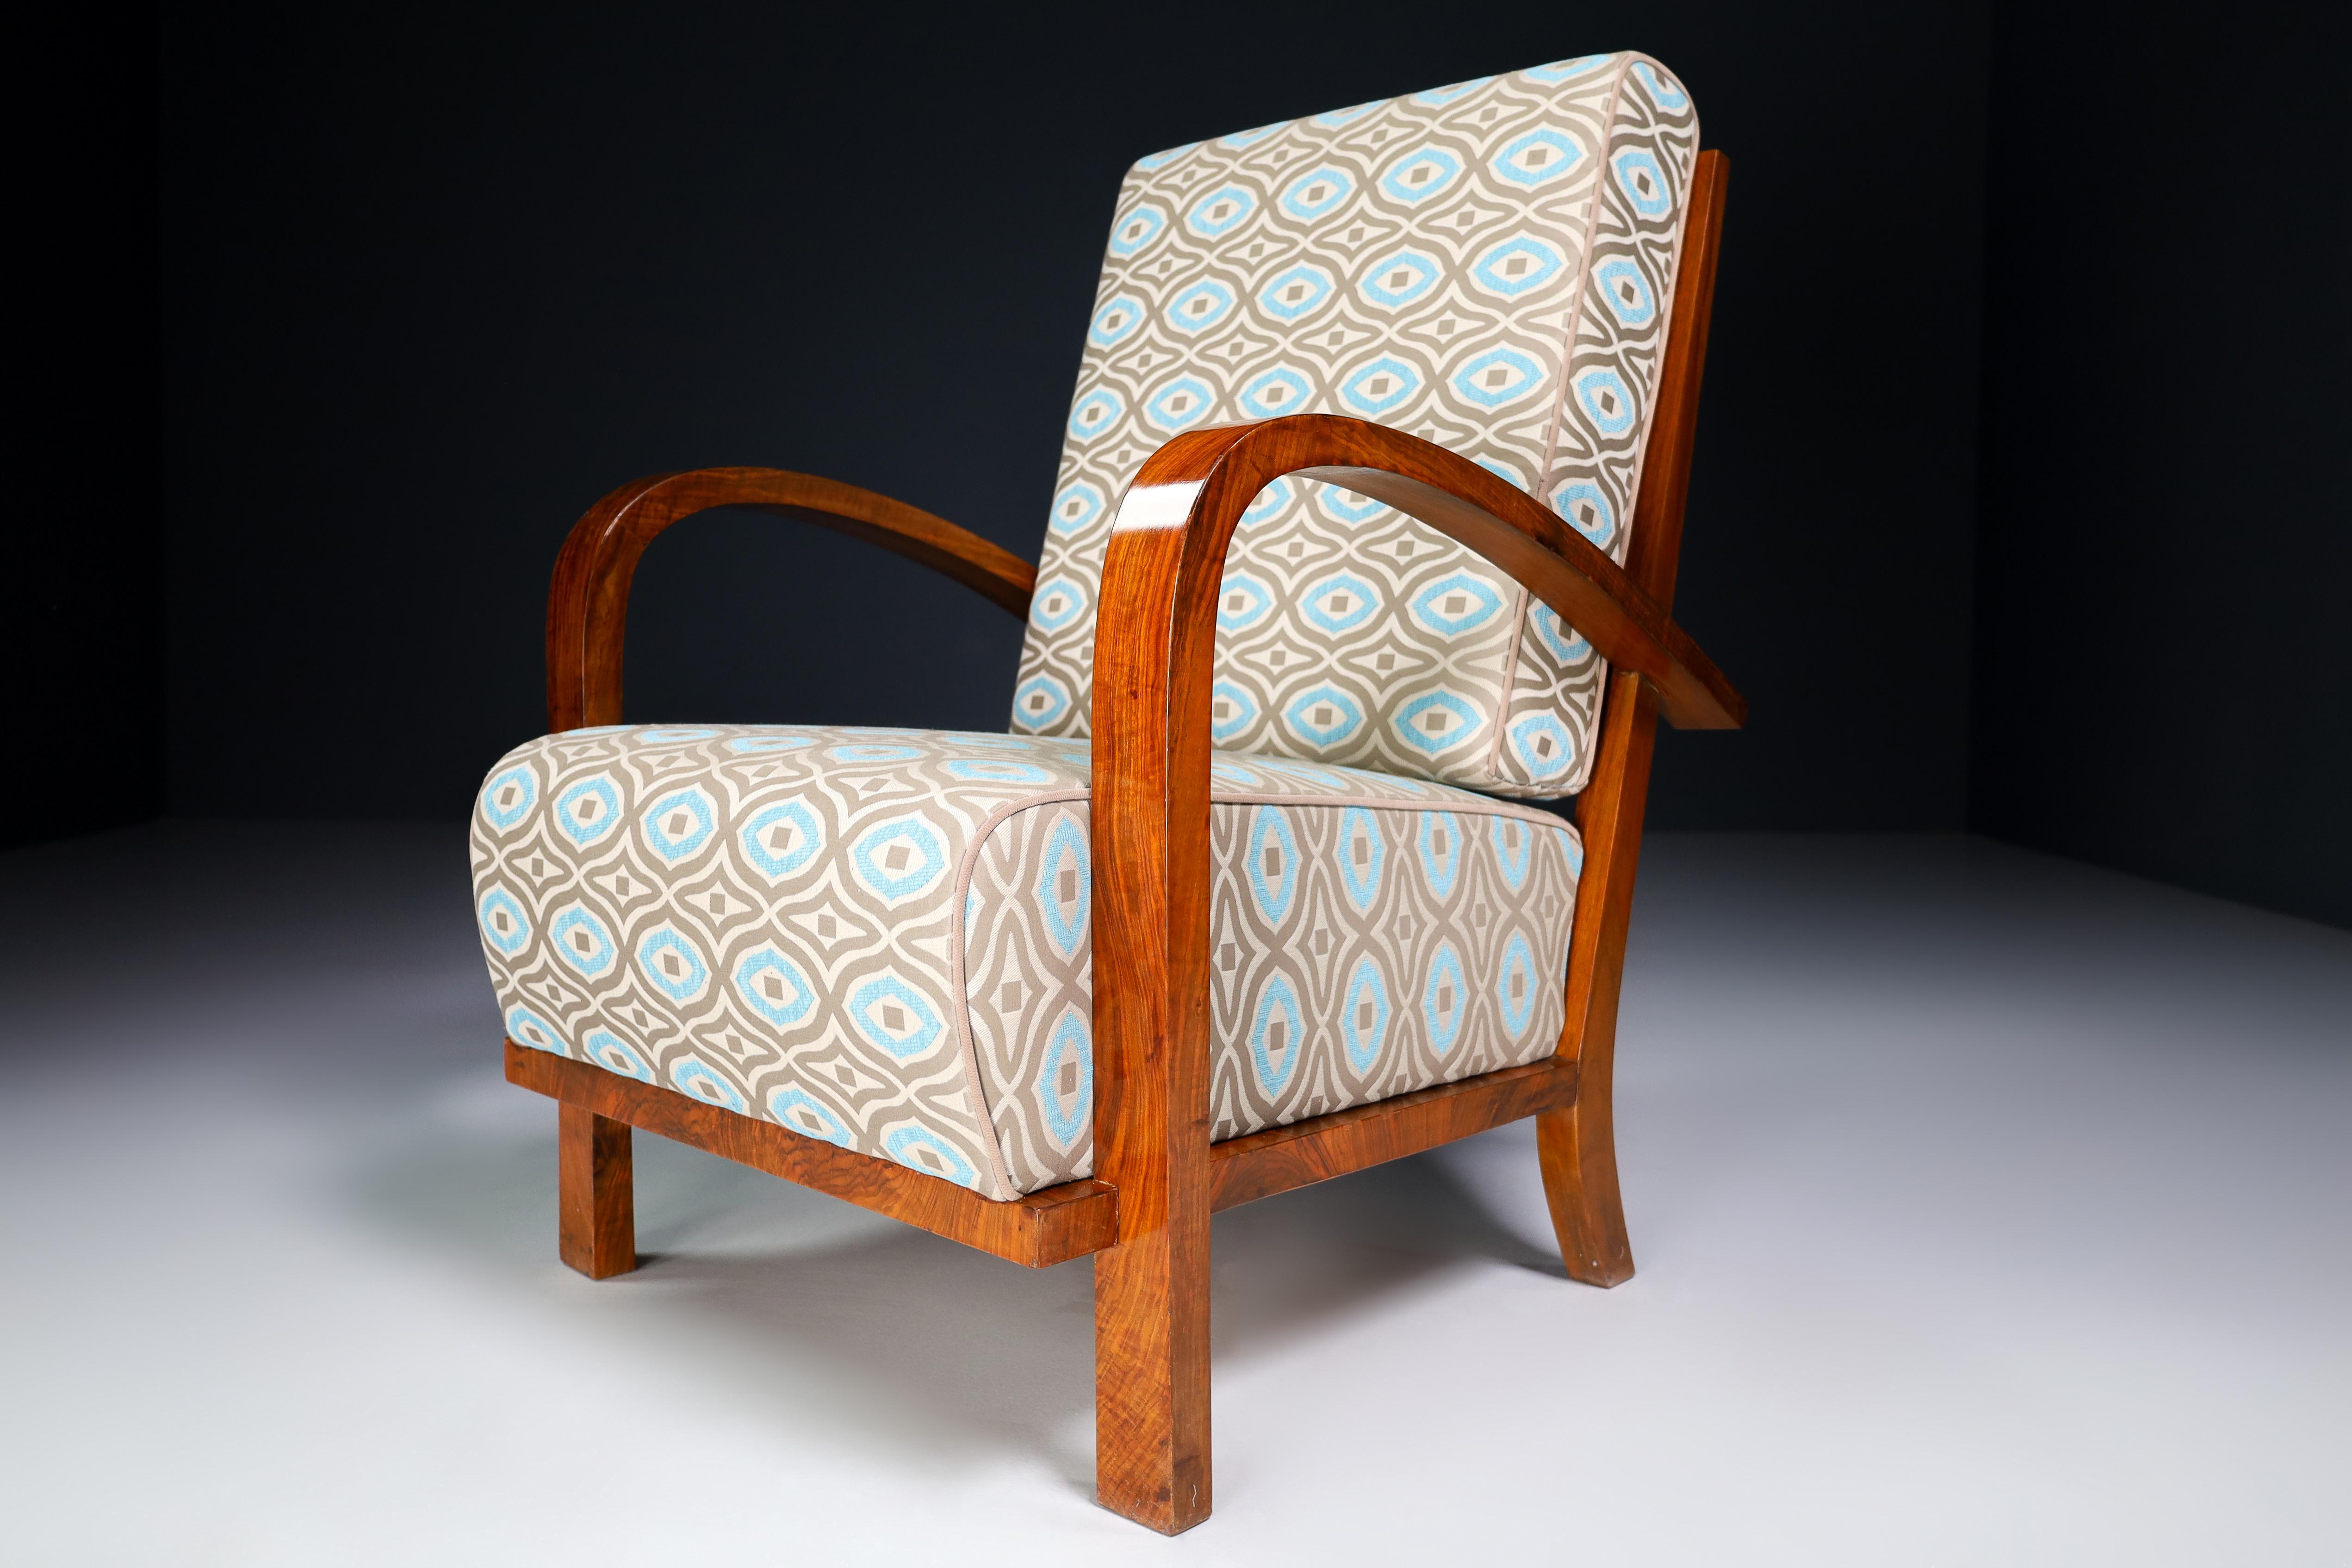 Czech Art-Deco Walnut Armchairs in Reupholstered in Fabric, Praque, 1930s For Sale